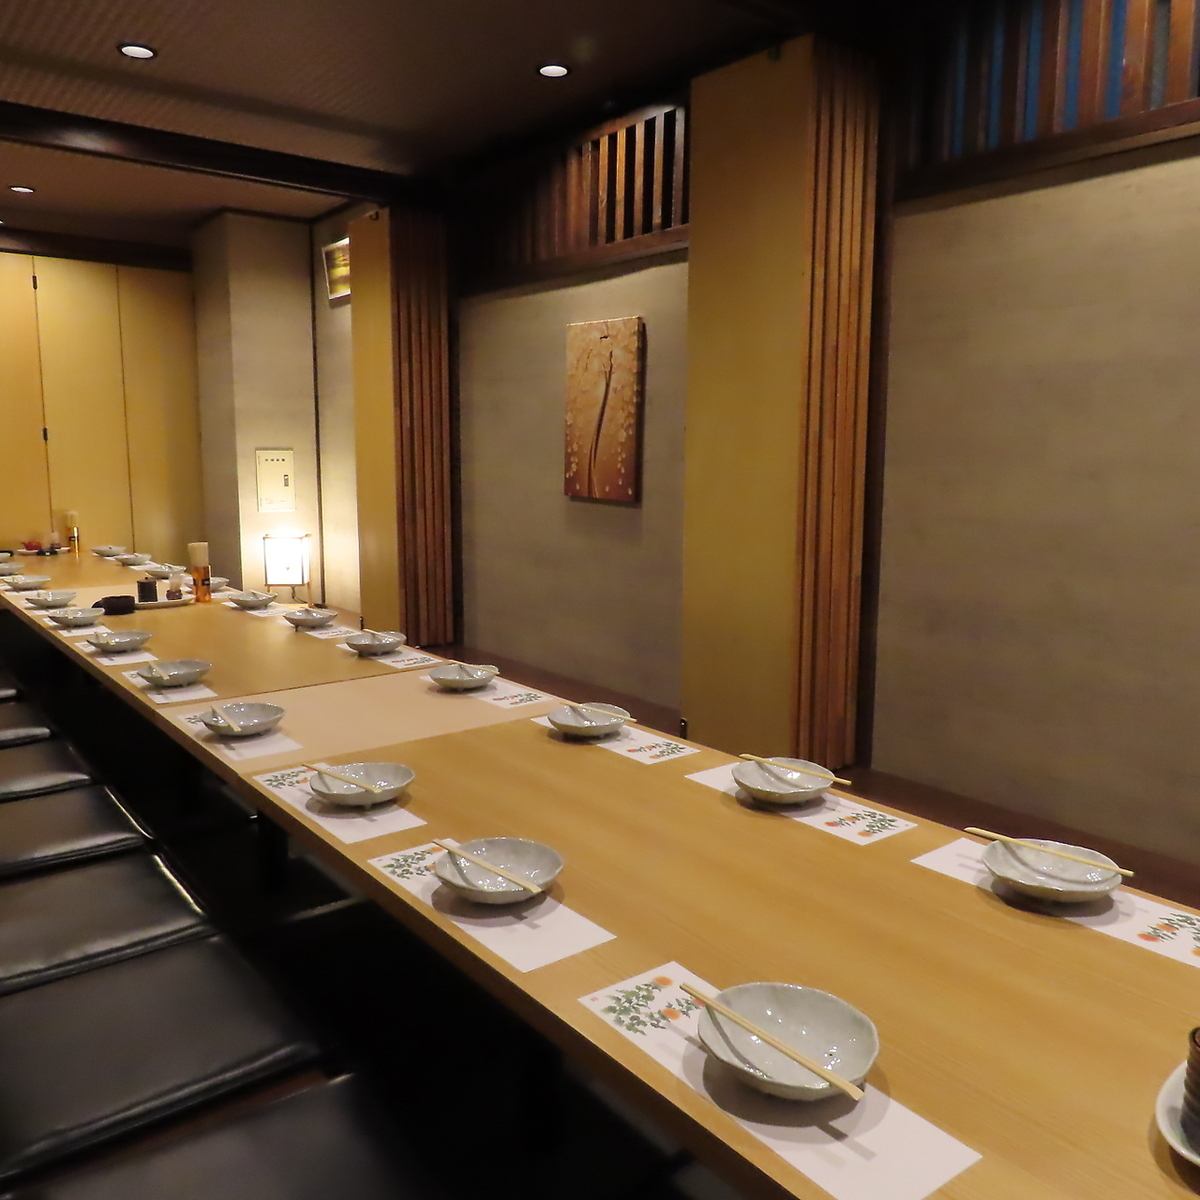 We have a private room that can accommodate up to 40 people.Suitable for large banquets too!